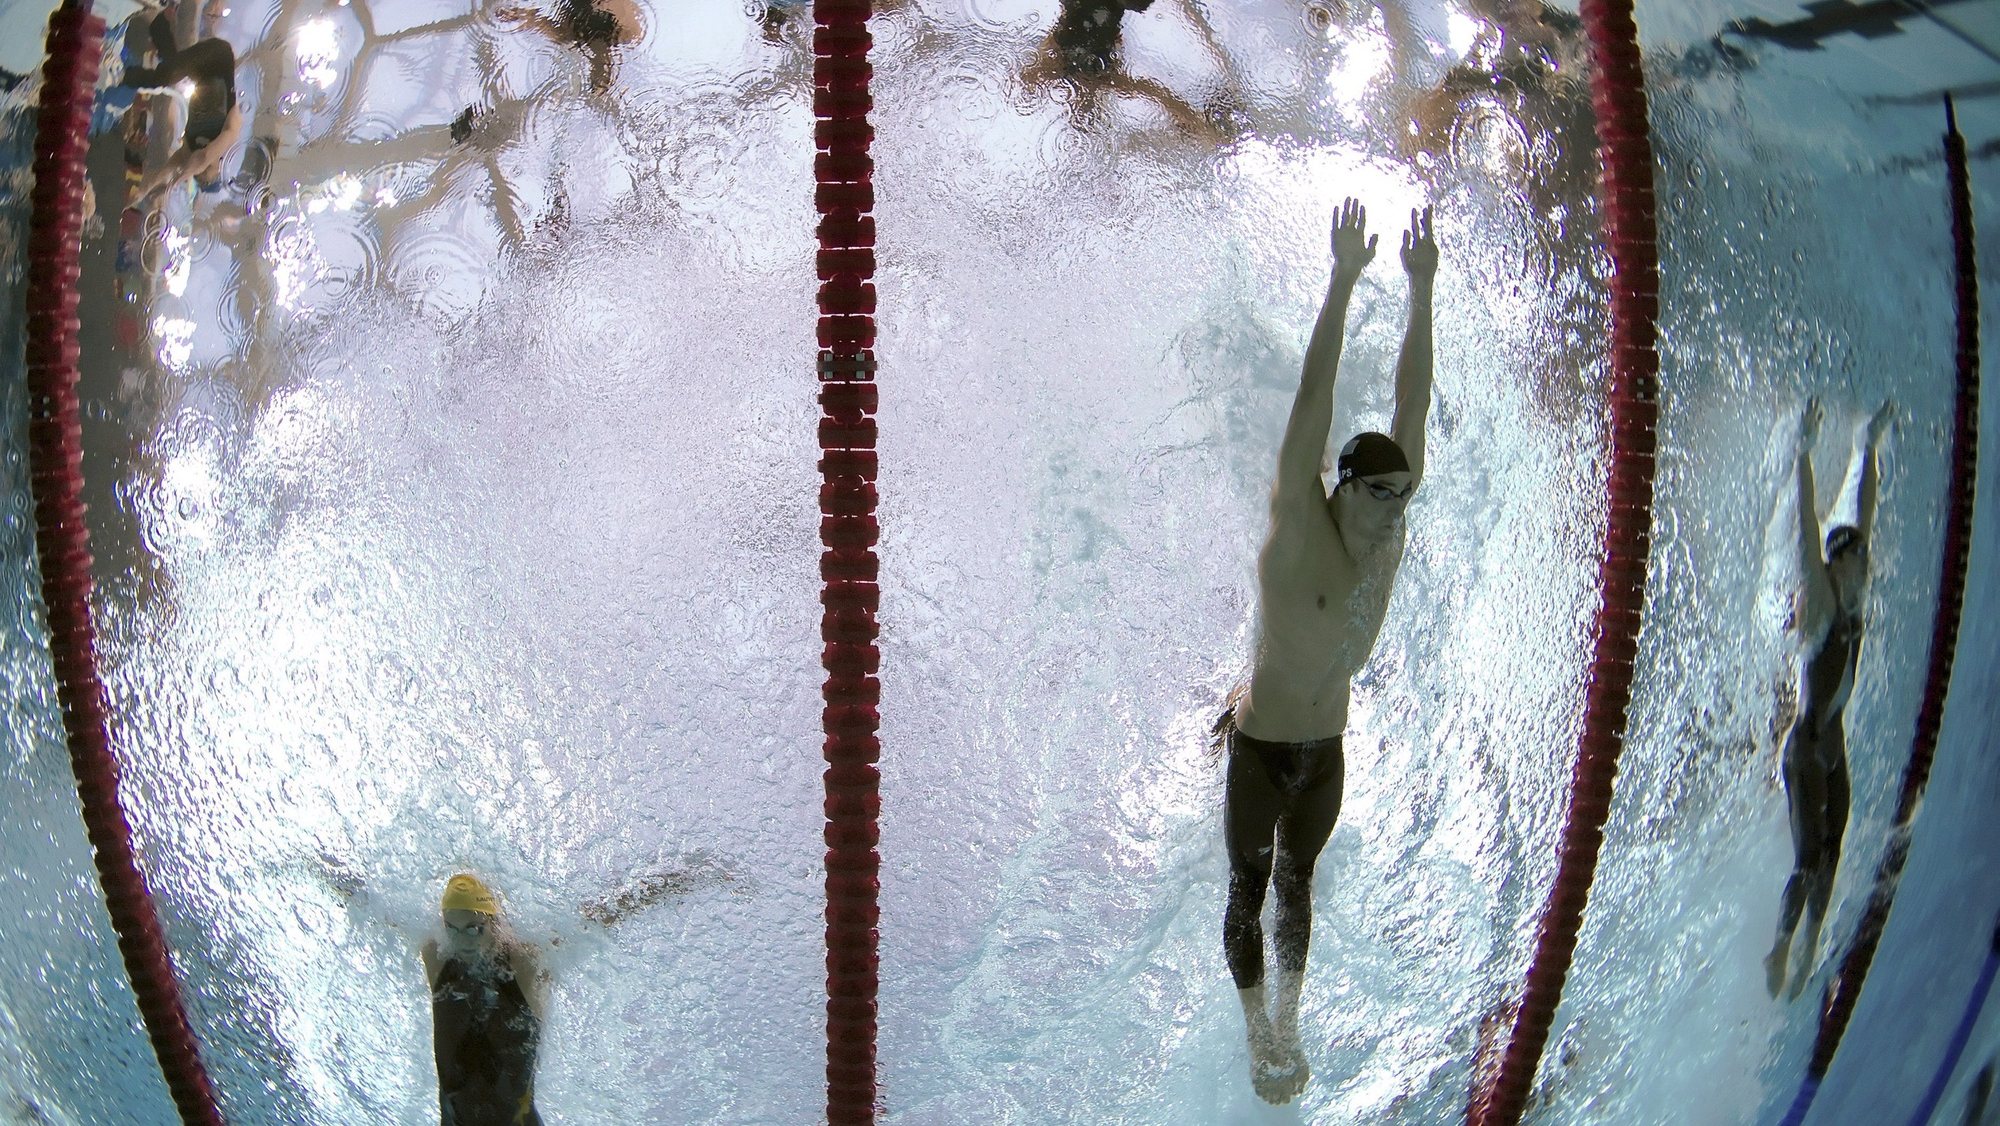 epa01451752 US swimmer Michael Phelps second from R, Australian Andrew Lauterstein (L) and Takuro Fujii from Japan (R)  competes in the butterfly leg of the men&#039;s 4 X 100m medley relay at the National Aquatic Center at the Beijing 2008 Olympic Games, Beijing, China, 17 August 2008. Phelps won his eighth Beijing Olympics gold medal with the teams win which also set a new world record of 3:29.34 allowing Phelps to surpass Mark Spitz&#039;s 1972 Munich games record of seven.  EPA/PATRICK B. KRAEMER